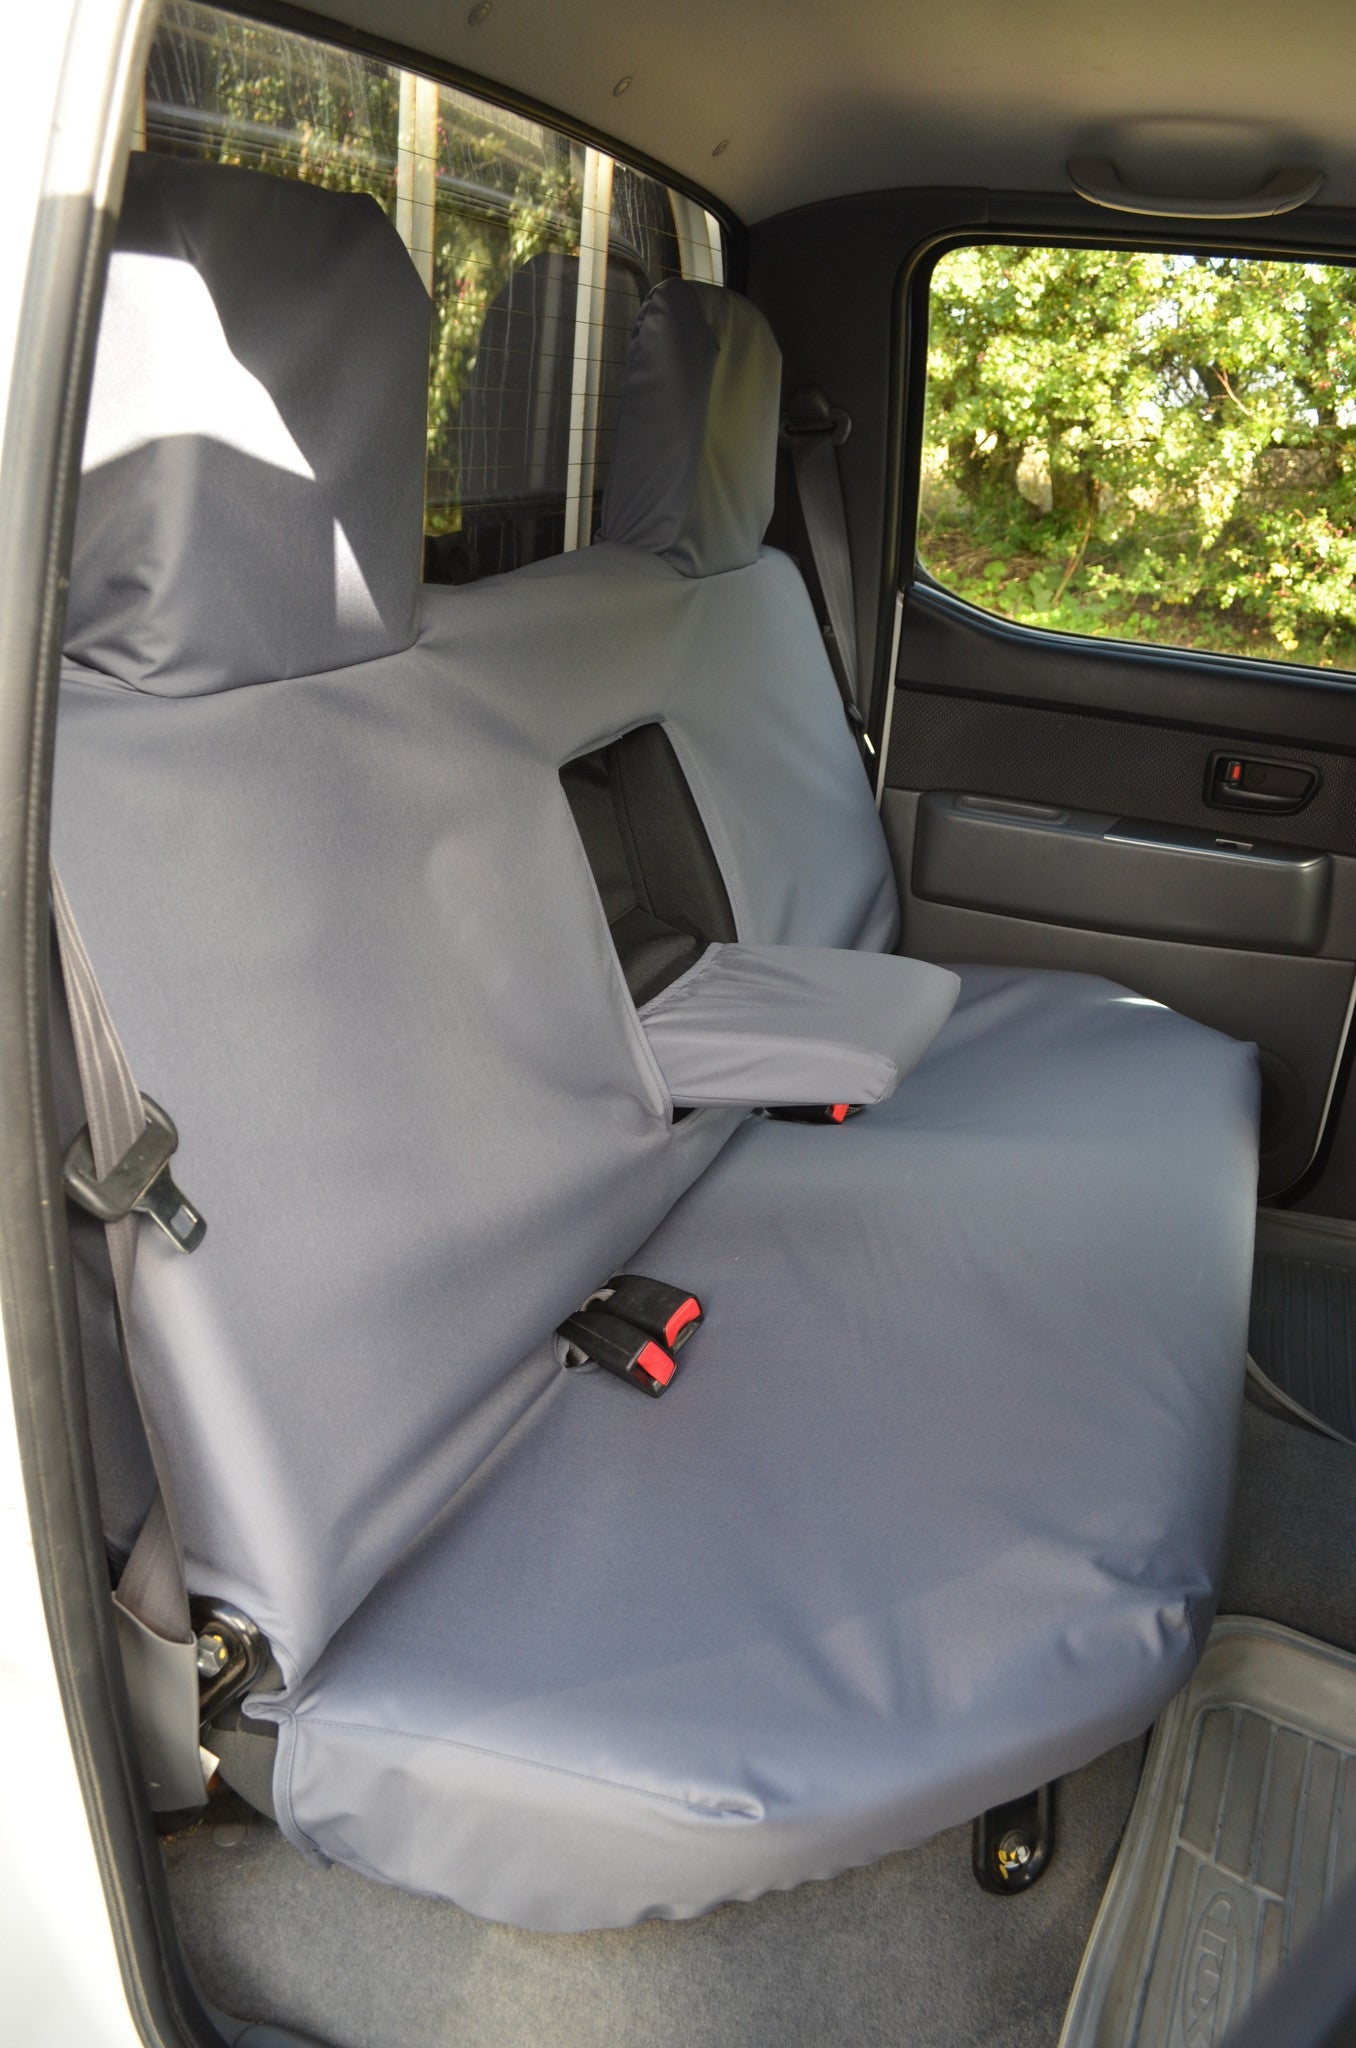 Ford Ranger 2006 to 2012 Seat Covers Rear Seat Cover / Grey Scutes Ltd